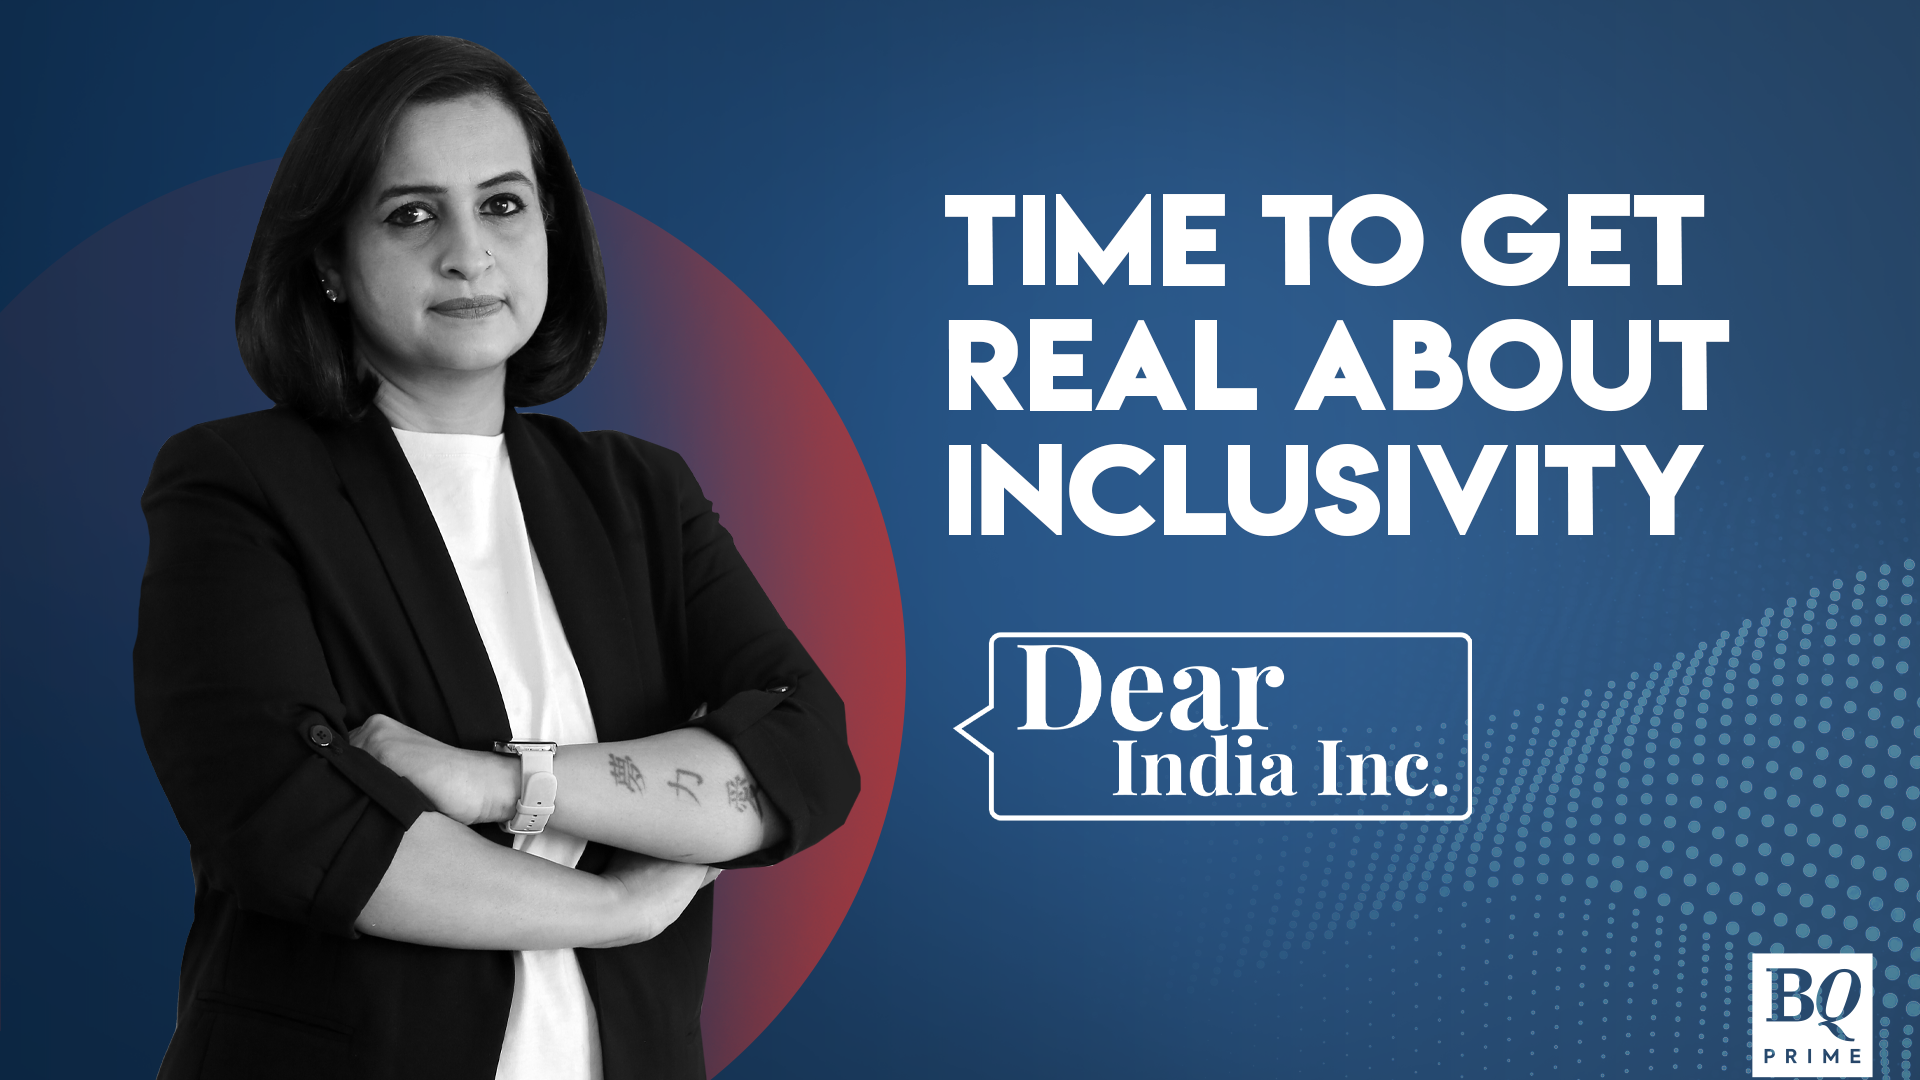 Dear India Inc.: Gender Inclusivity At Workplaces